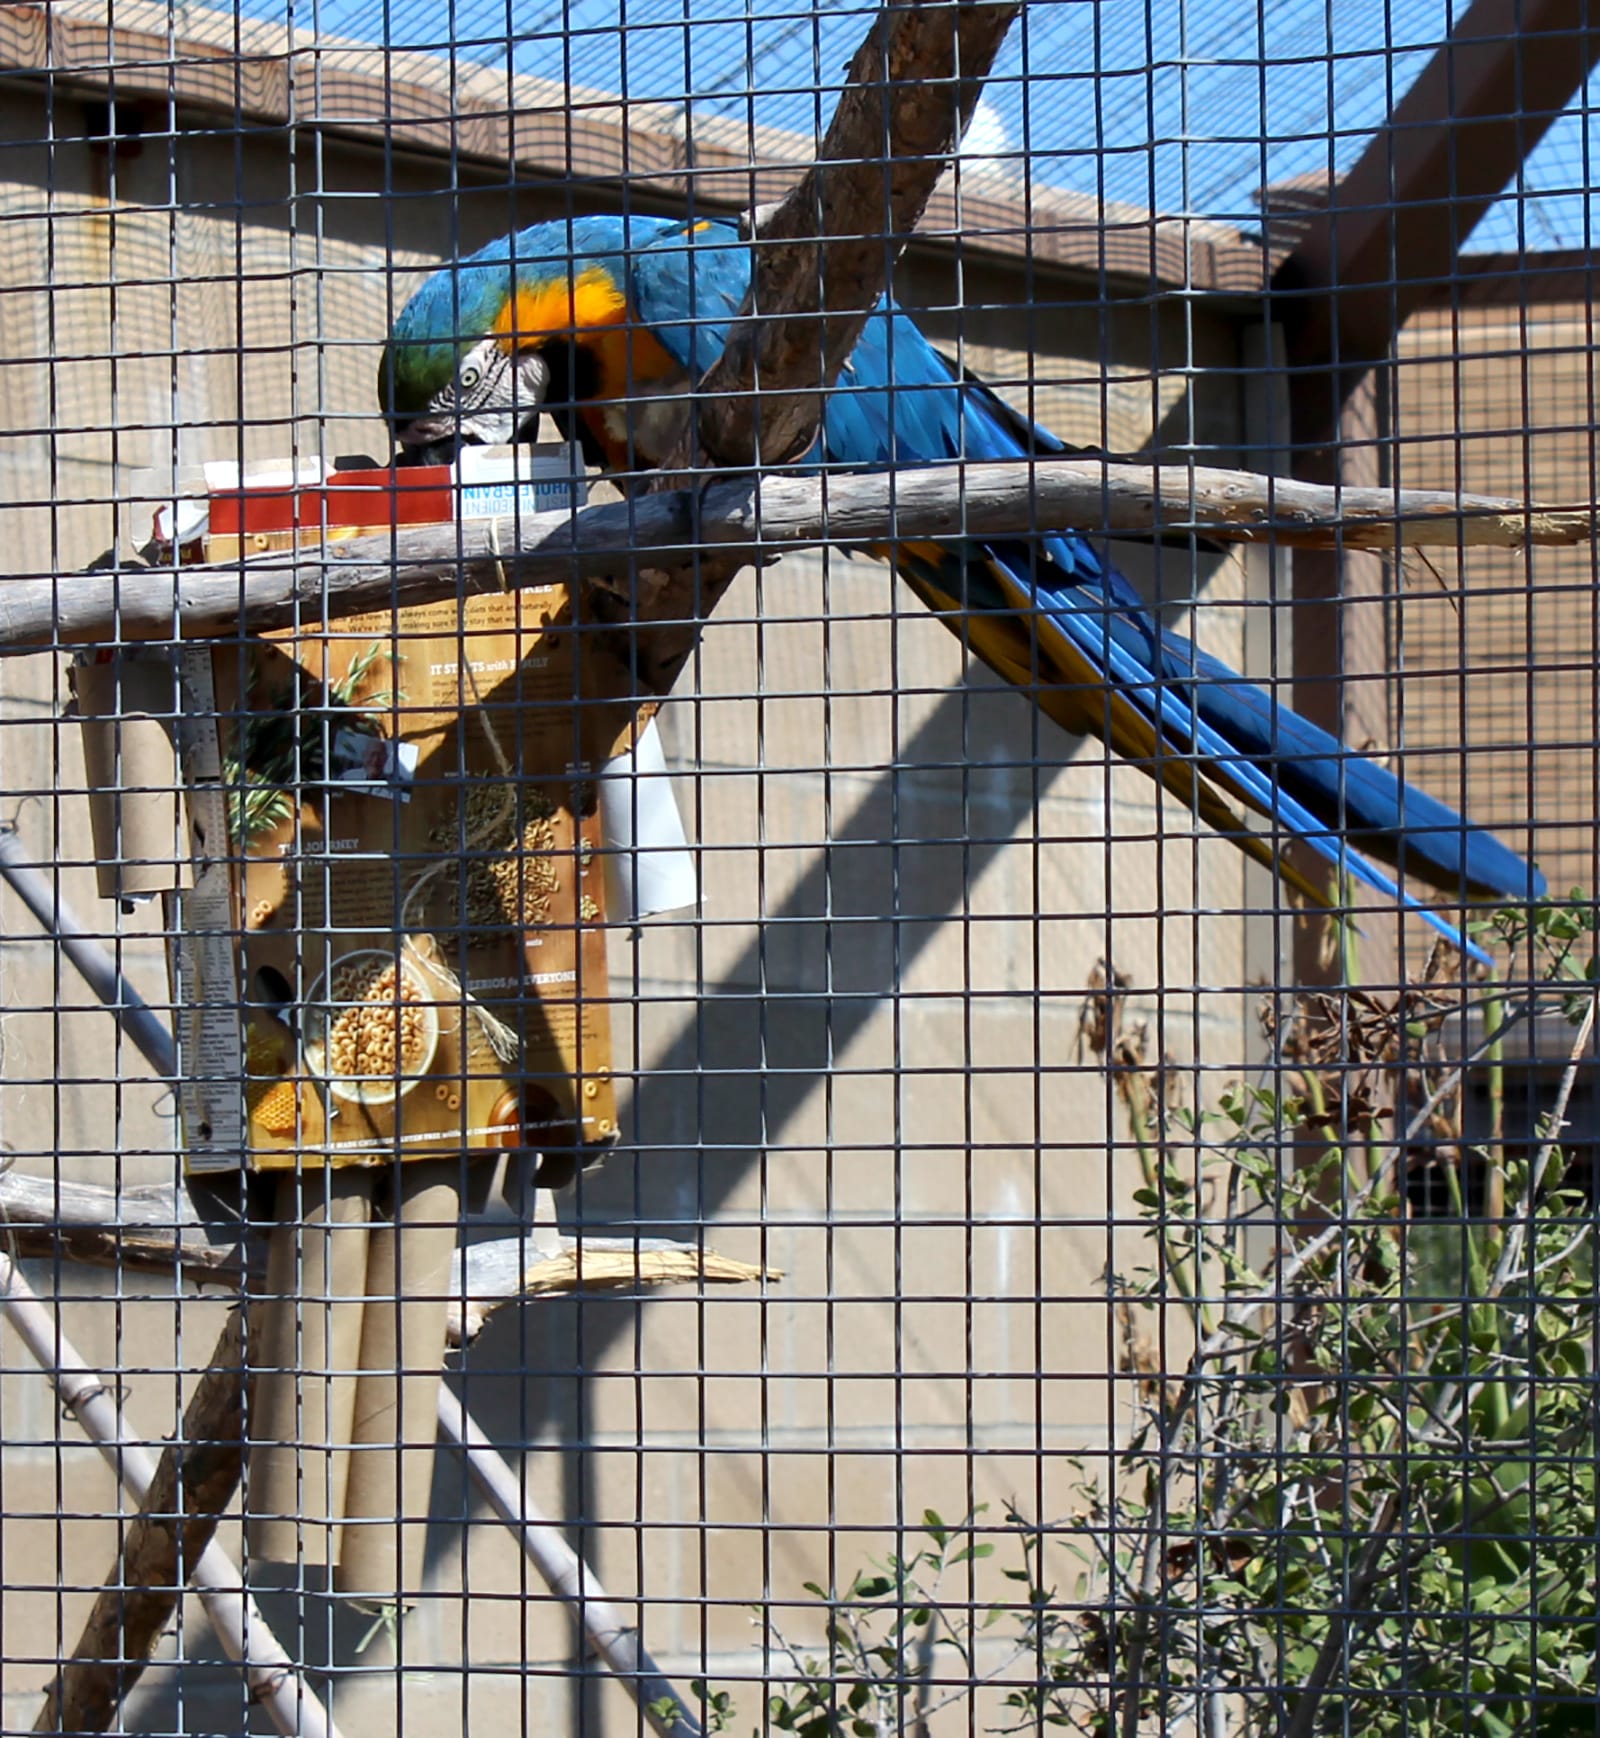 macaw plays with toy